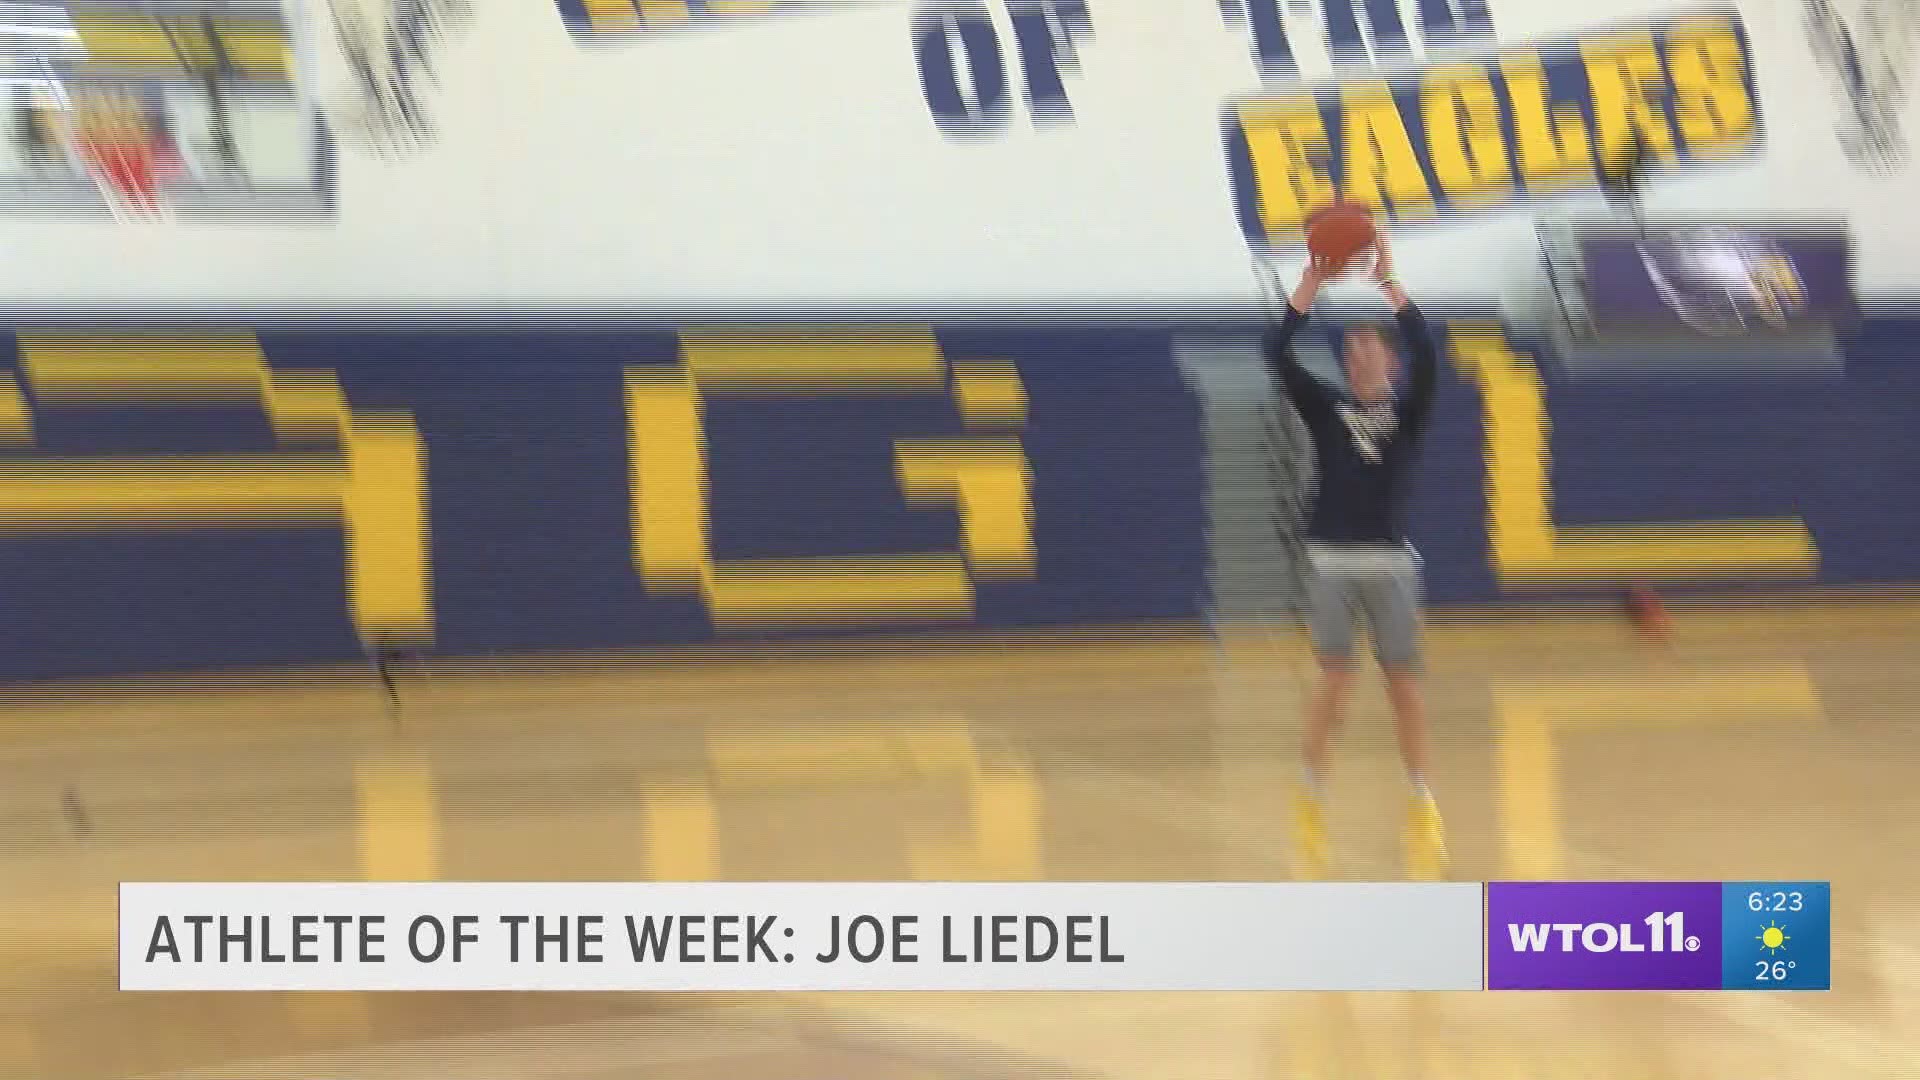 On Tuesday night, Liedel went over 2,000 points for his career. He will be playing his college ball at Detroit Mercy.